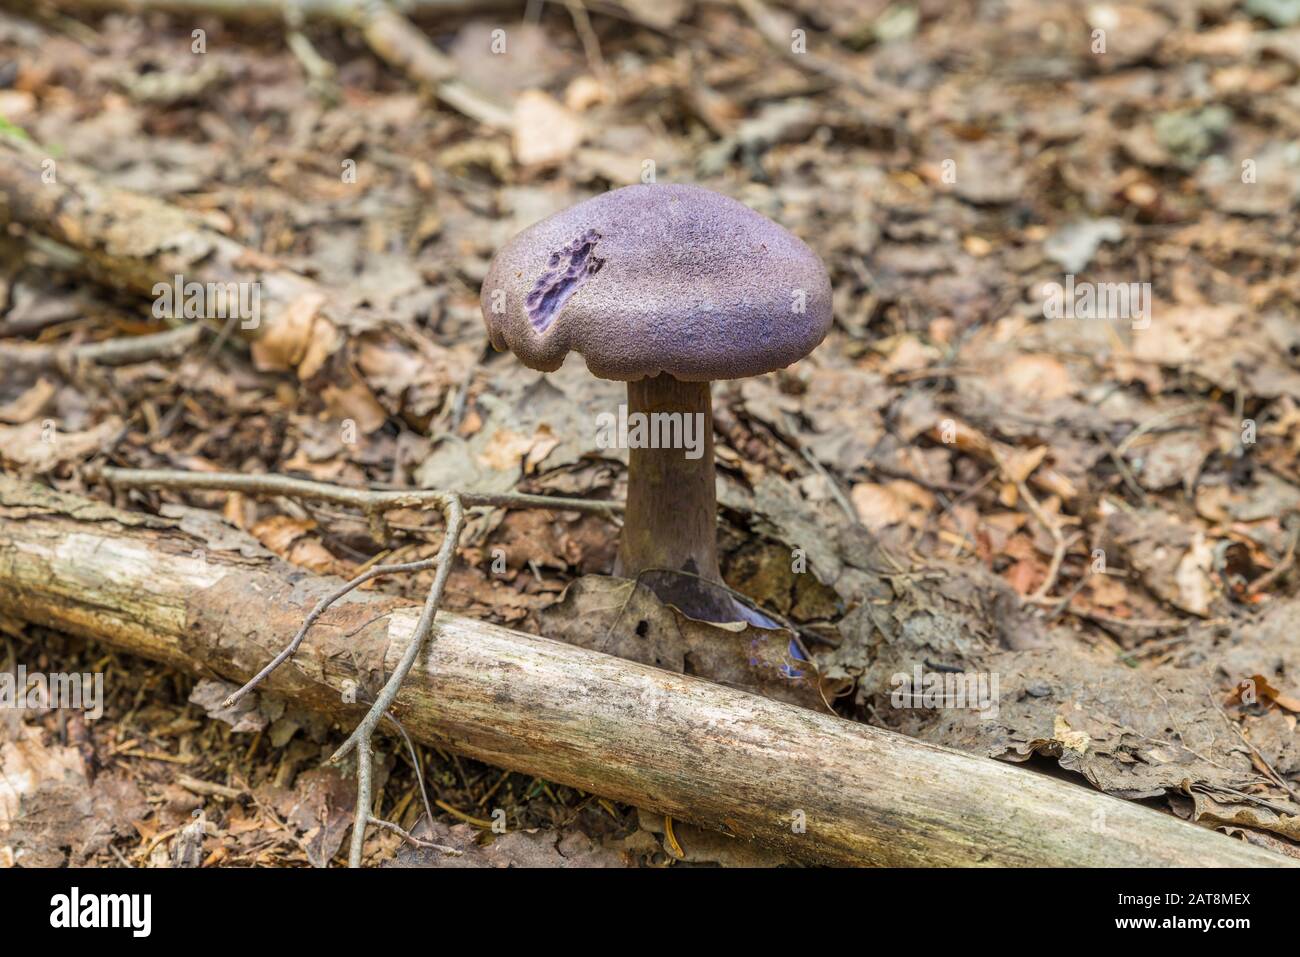 Violet veil mushroom (cortinarius violaceus) in a forest grows from leaves, Germany Stock Photo